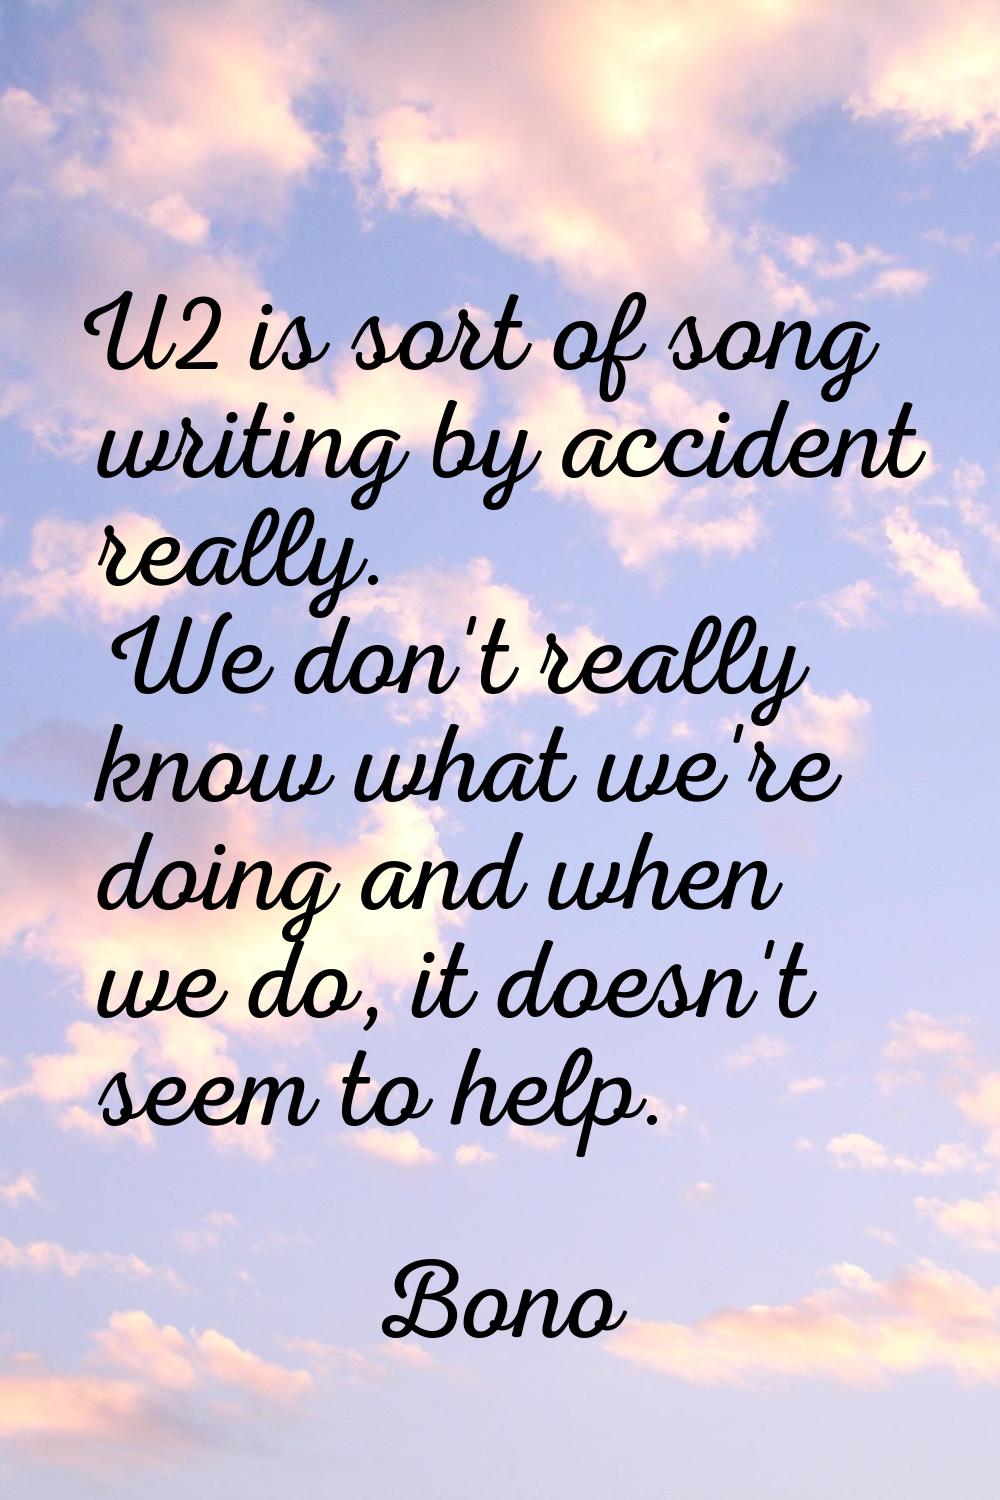 U2 is sort of song writing by accident really. We don't really know what we're doing and when we do